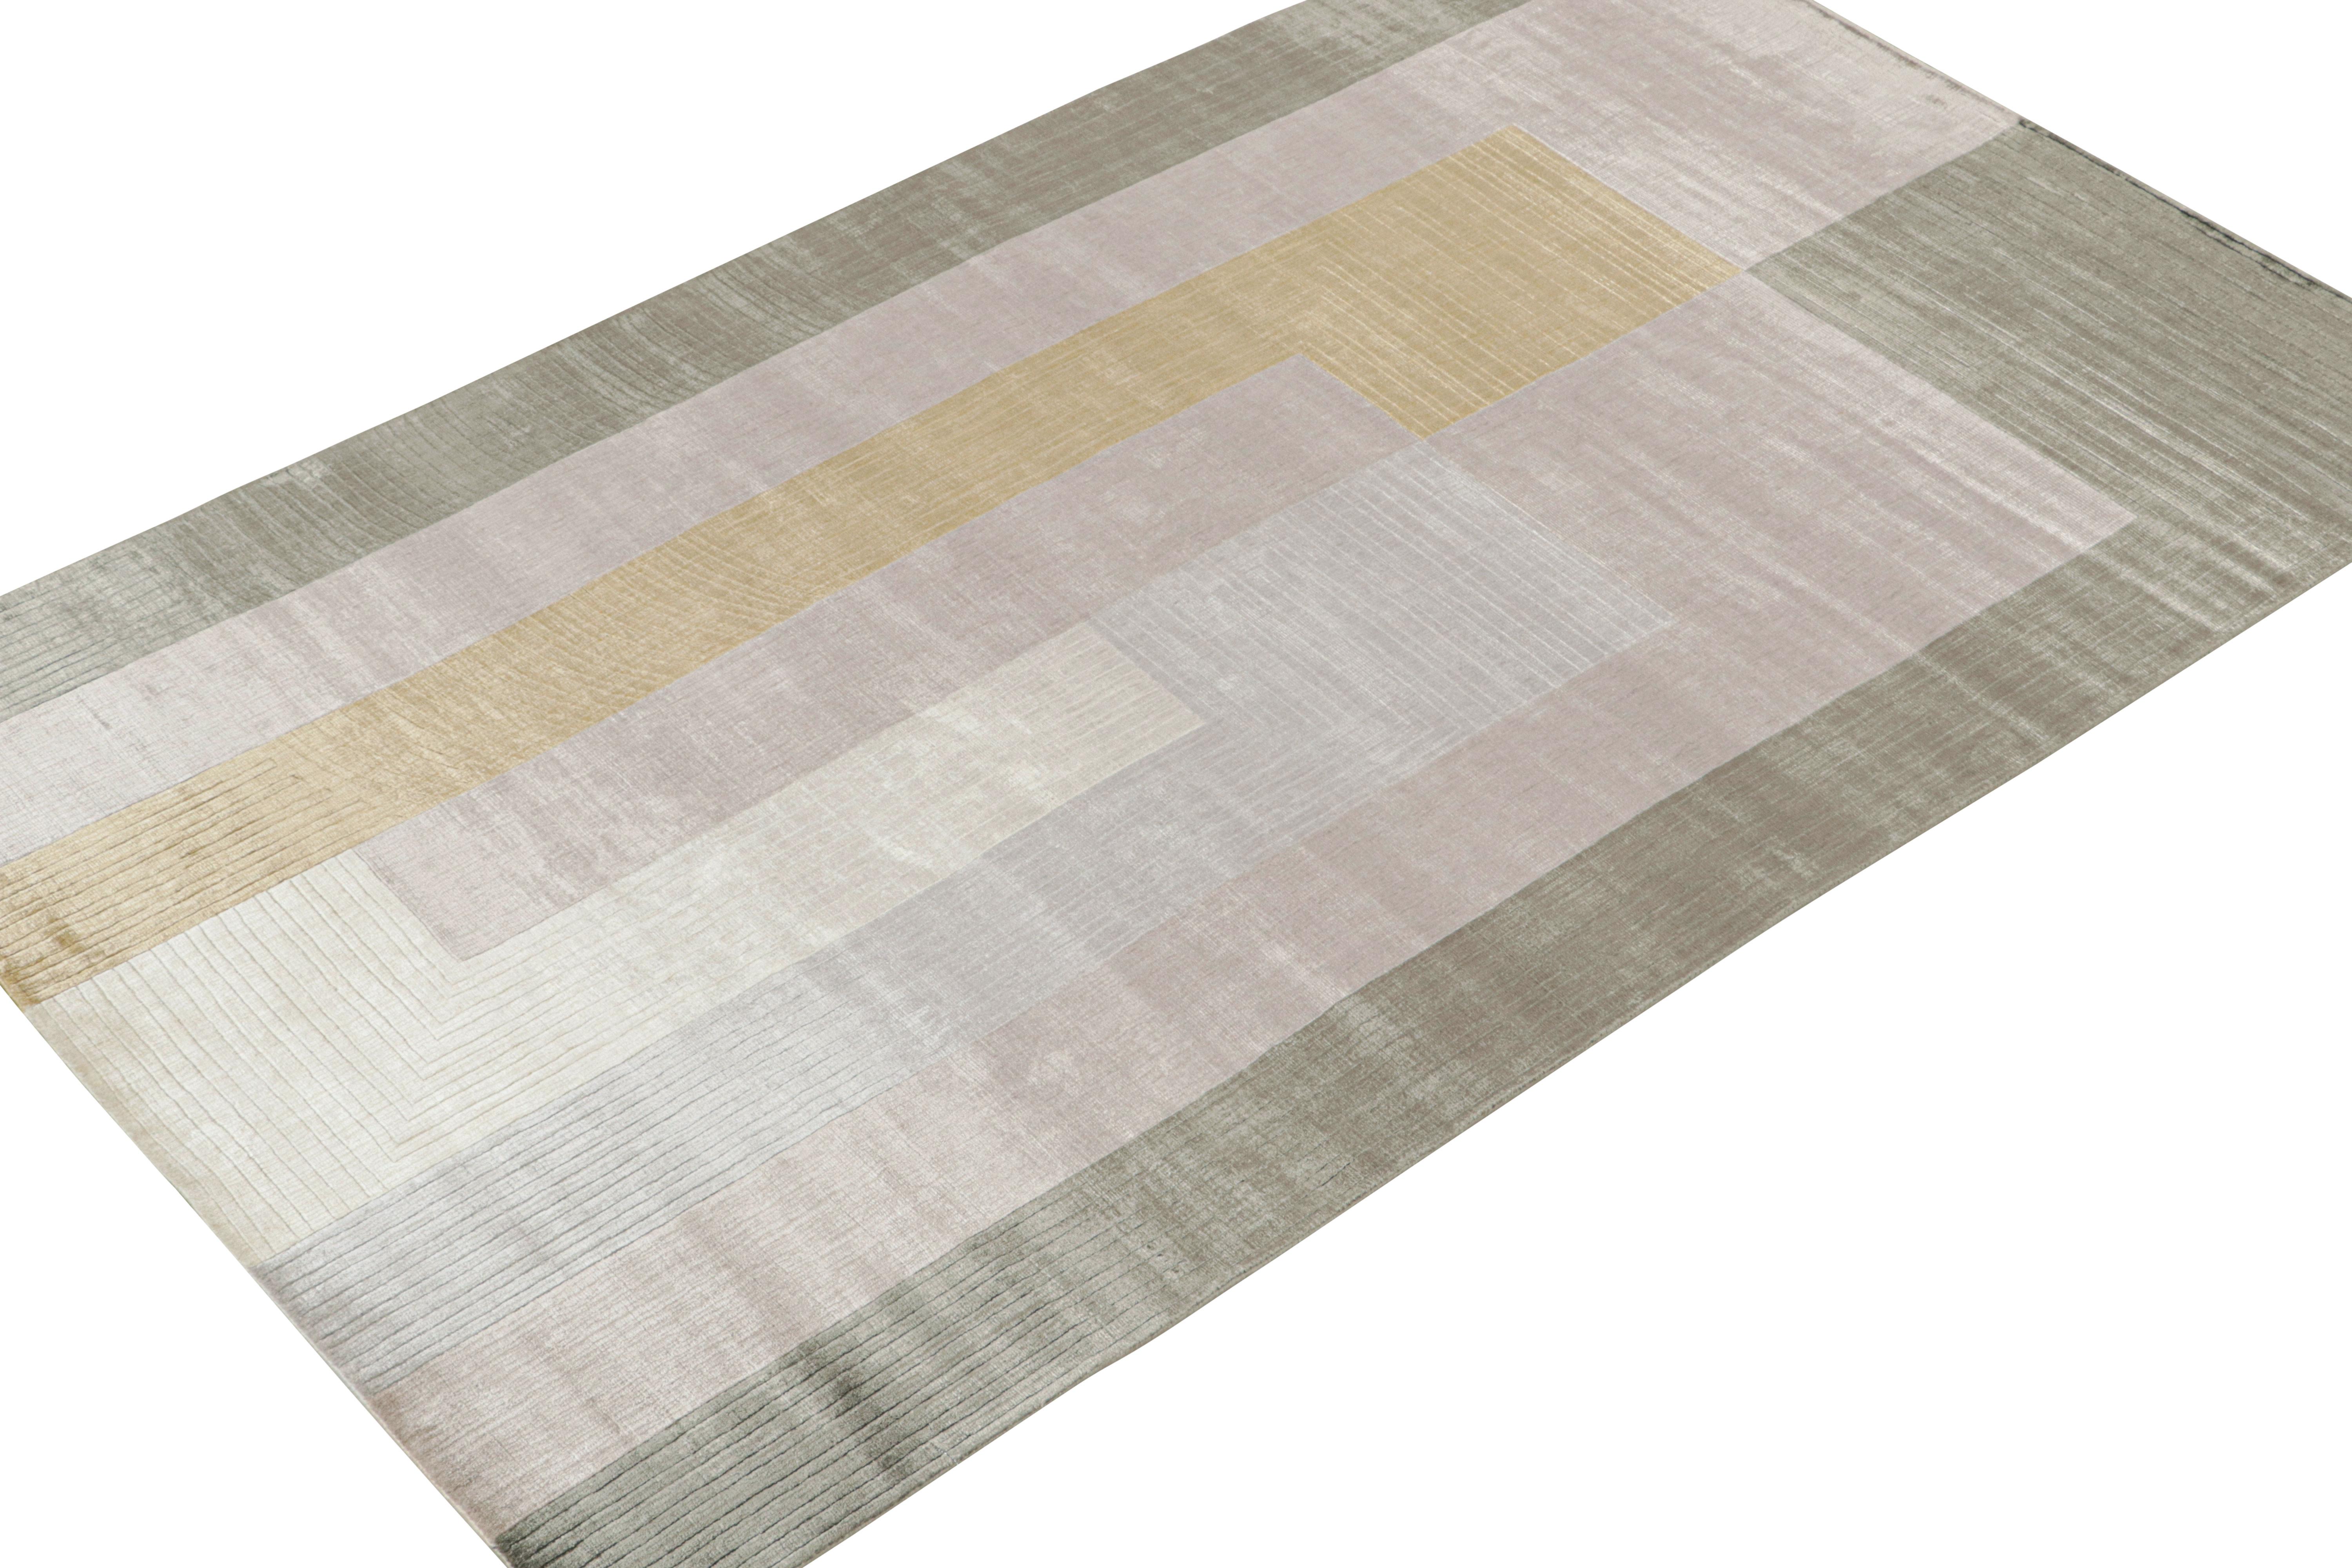 Art Deco Rug & Kilim’s Modern Rug in Lavender with Geometric Patterns For Sale